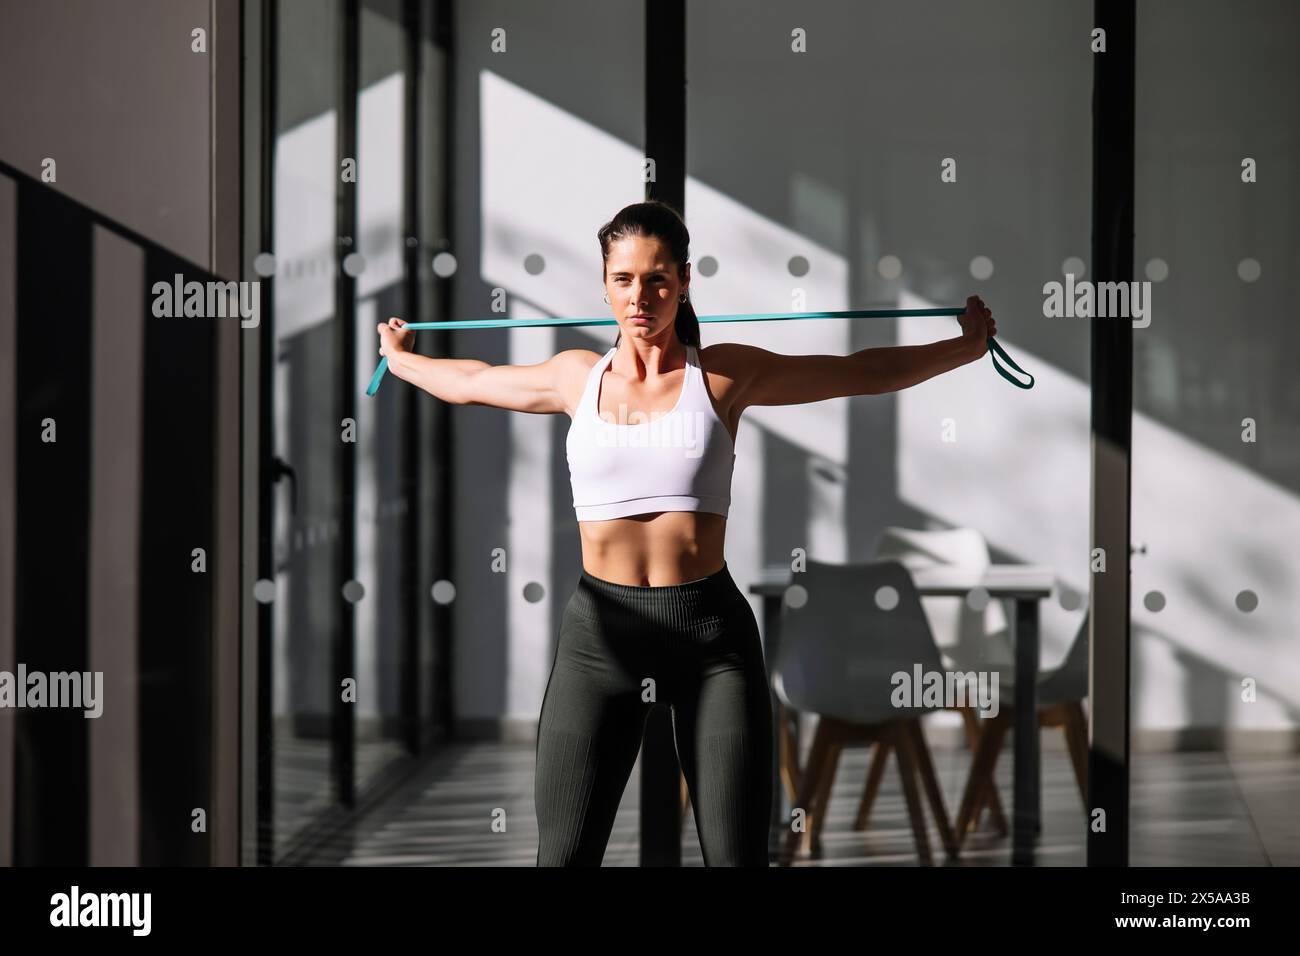 A focused female athlete uses a resistance band for a home workout in a modern, sunlit space Stock Photo